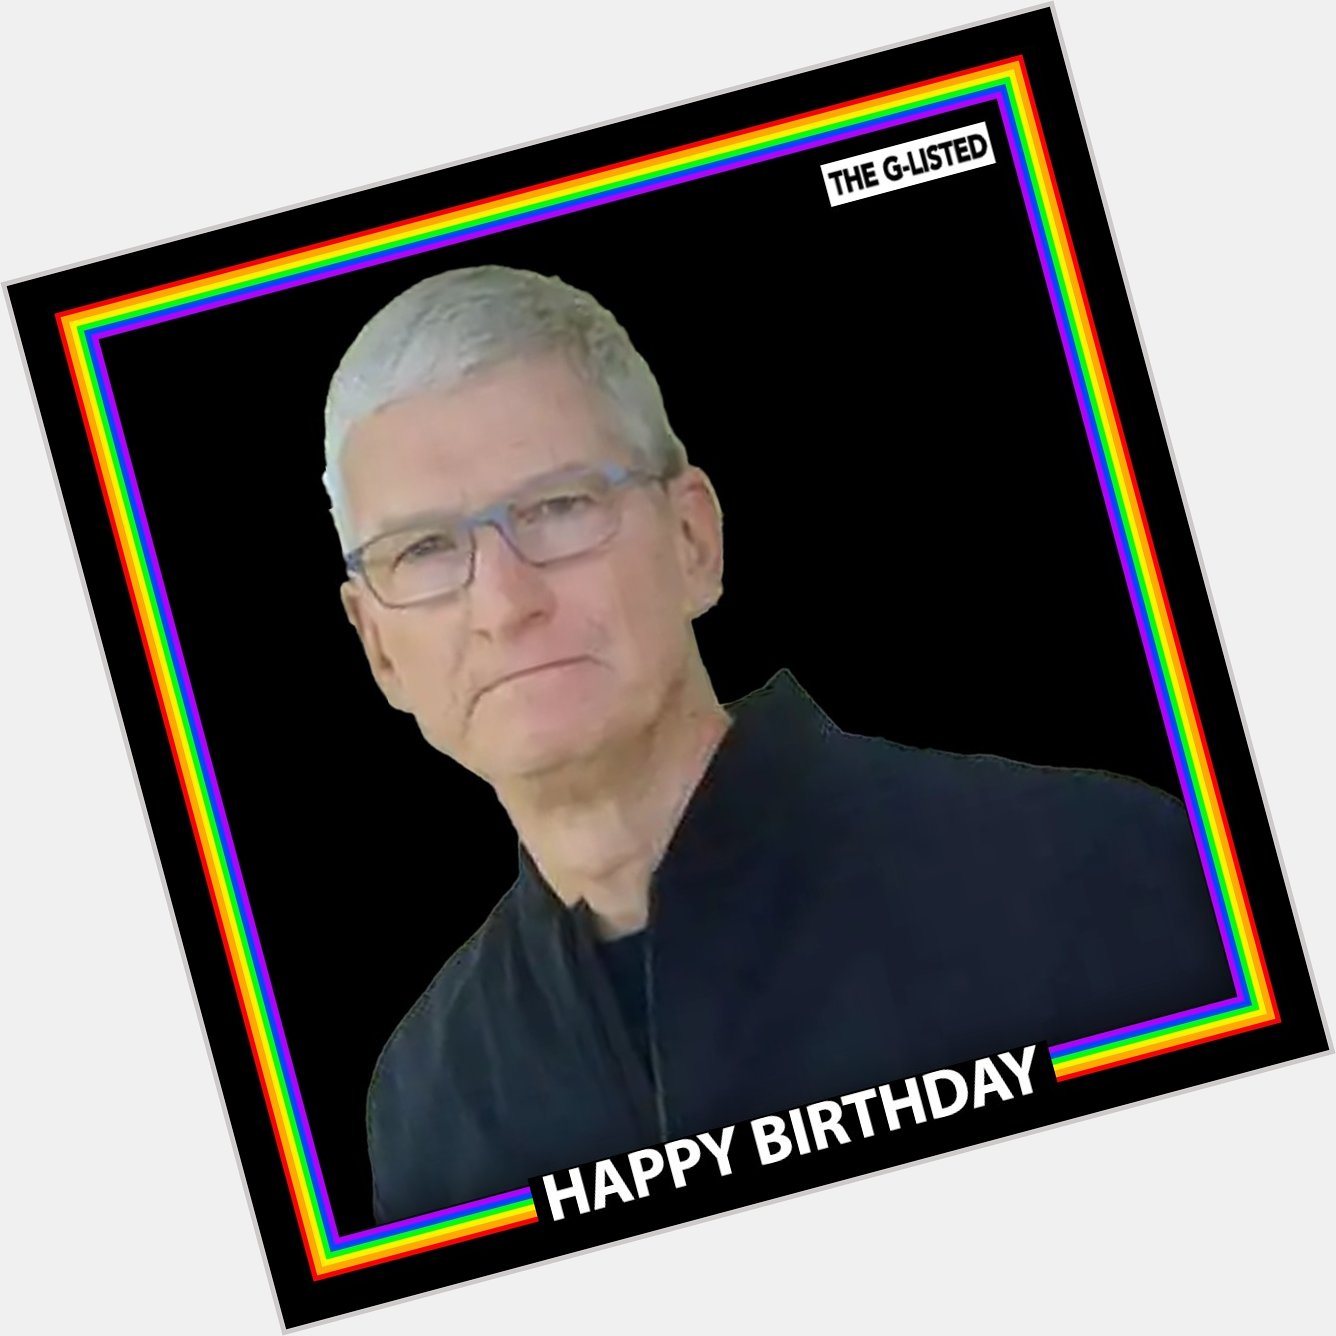 Happy birthday to CEO Tim Cook! 